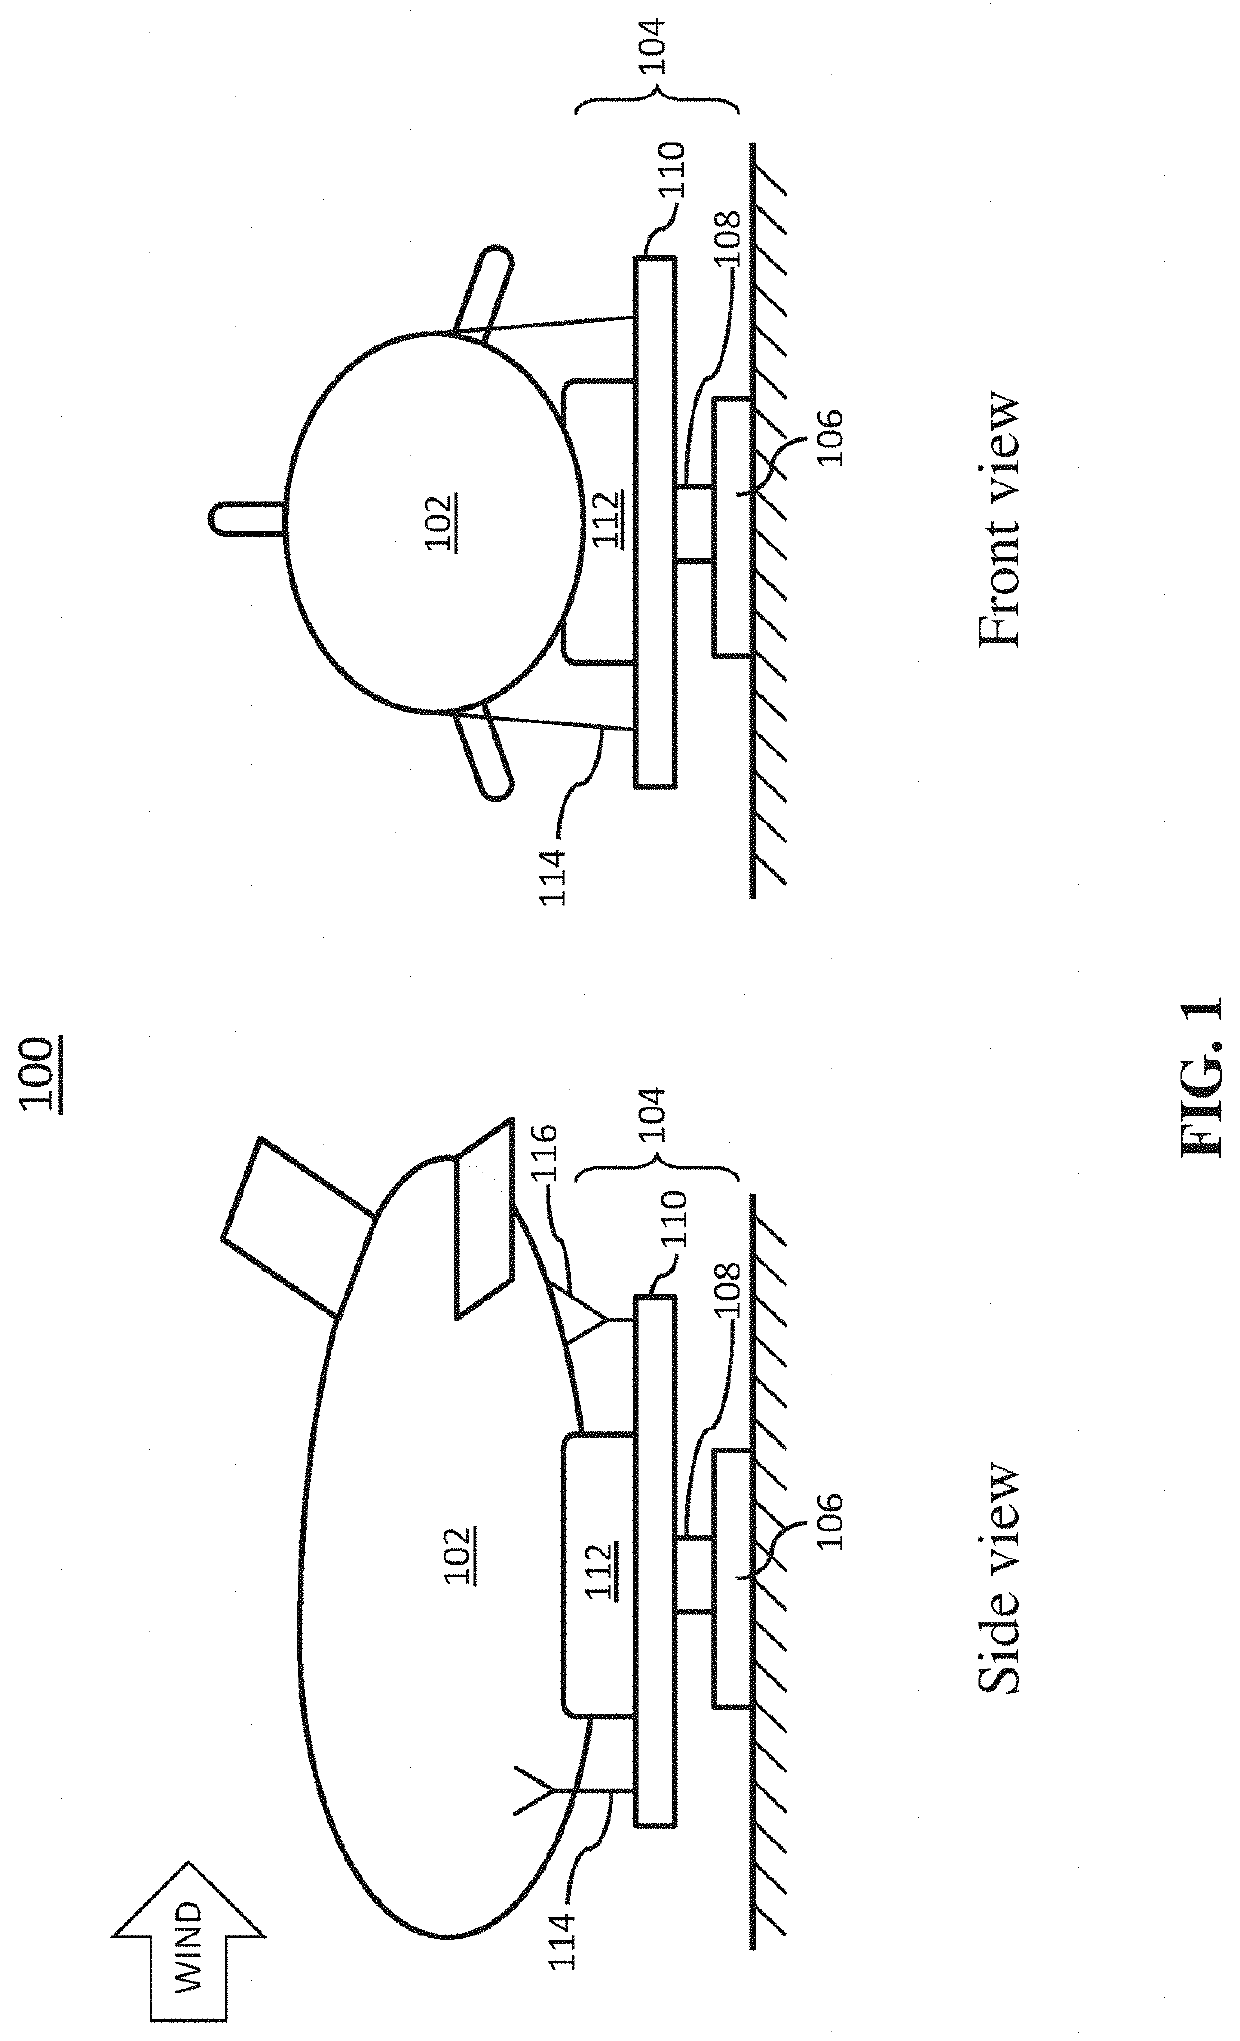 Systems and methods for automated, lighter-than-air airborne platform